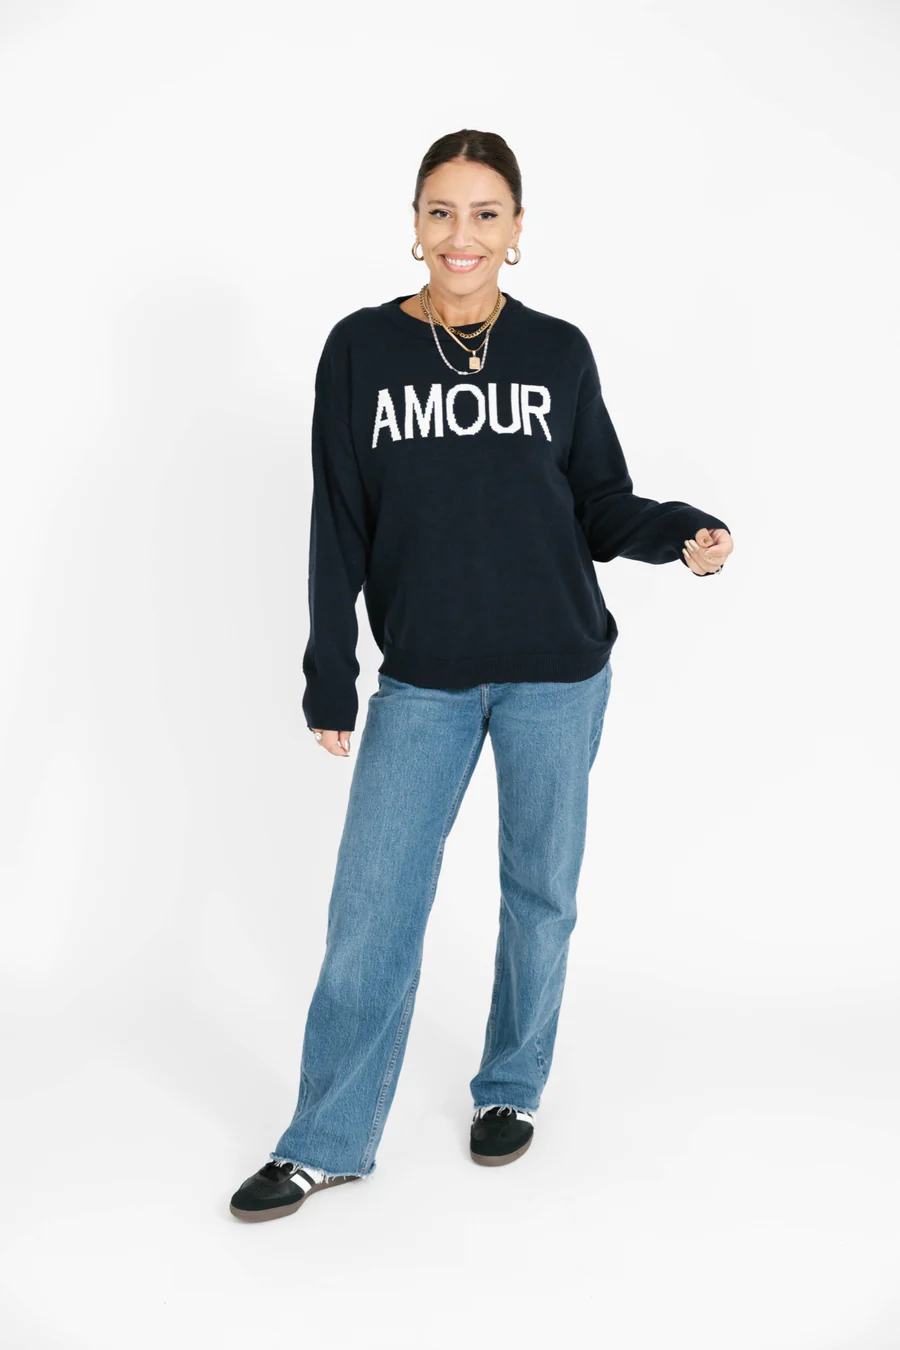 S&T- Amour Sweater